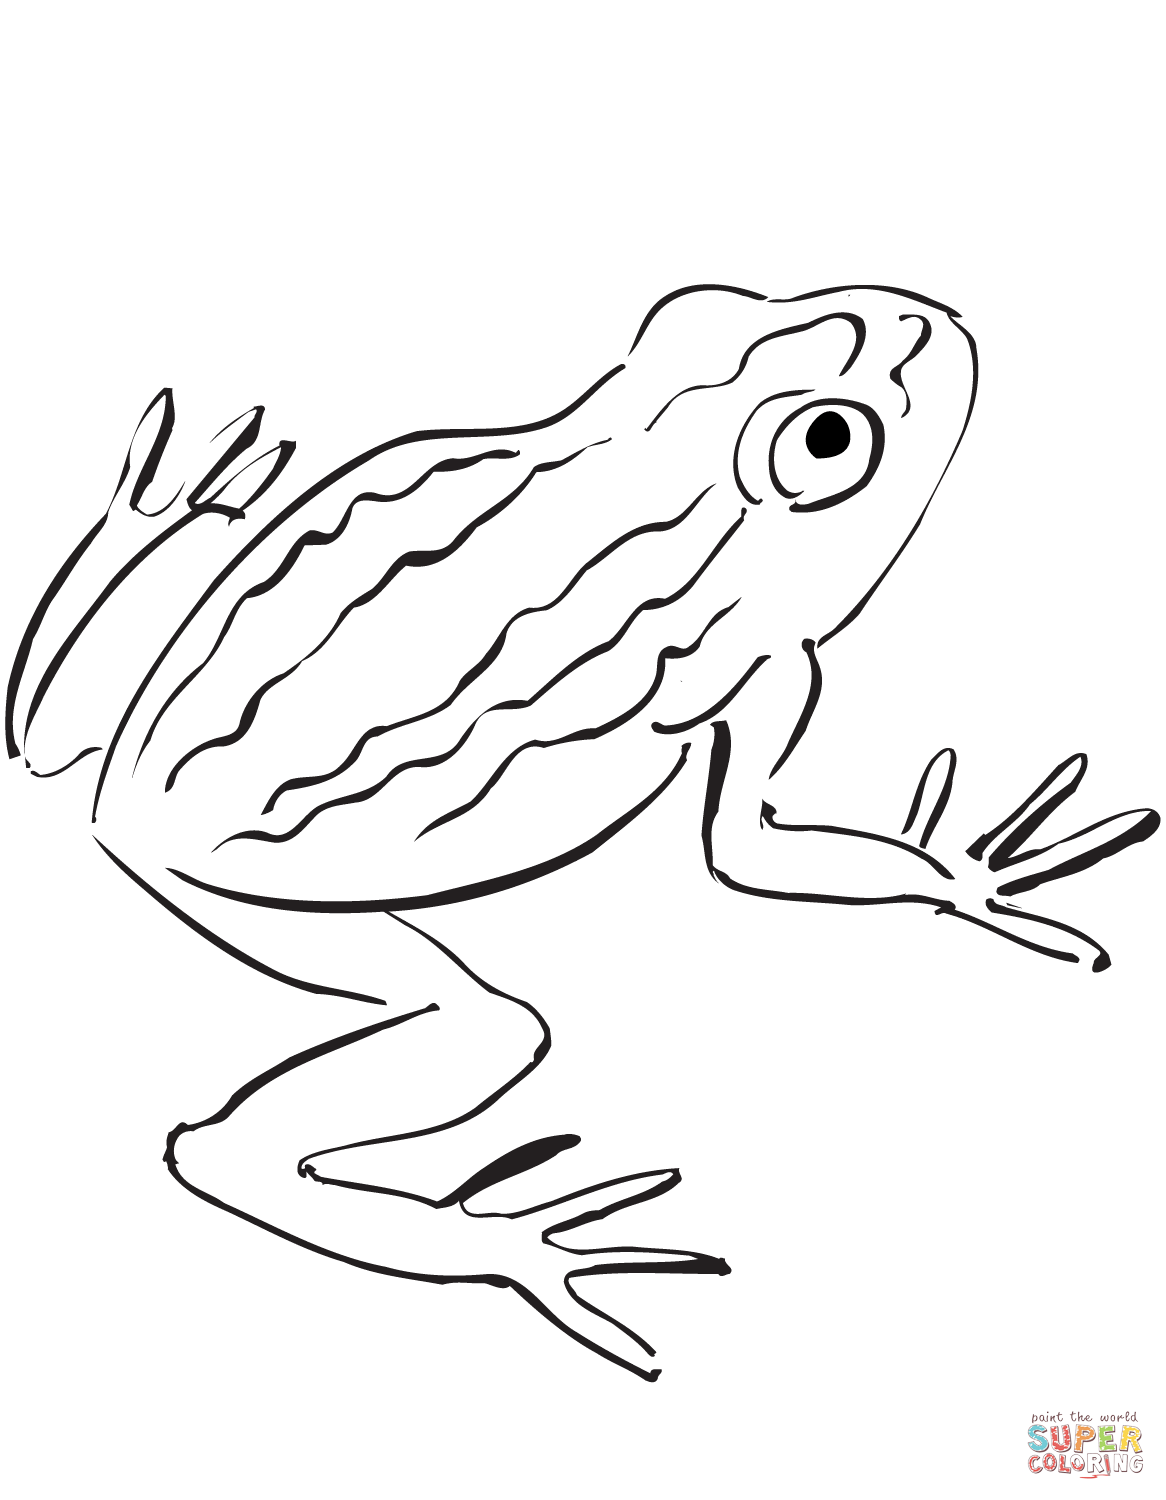 New toad coloring page